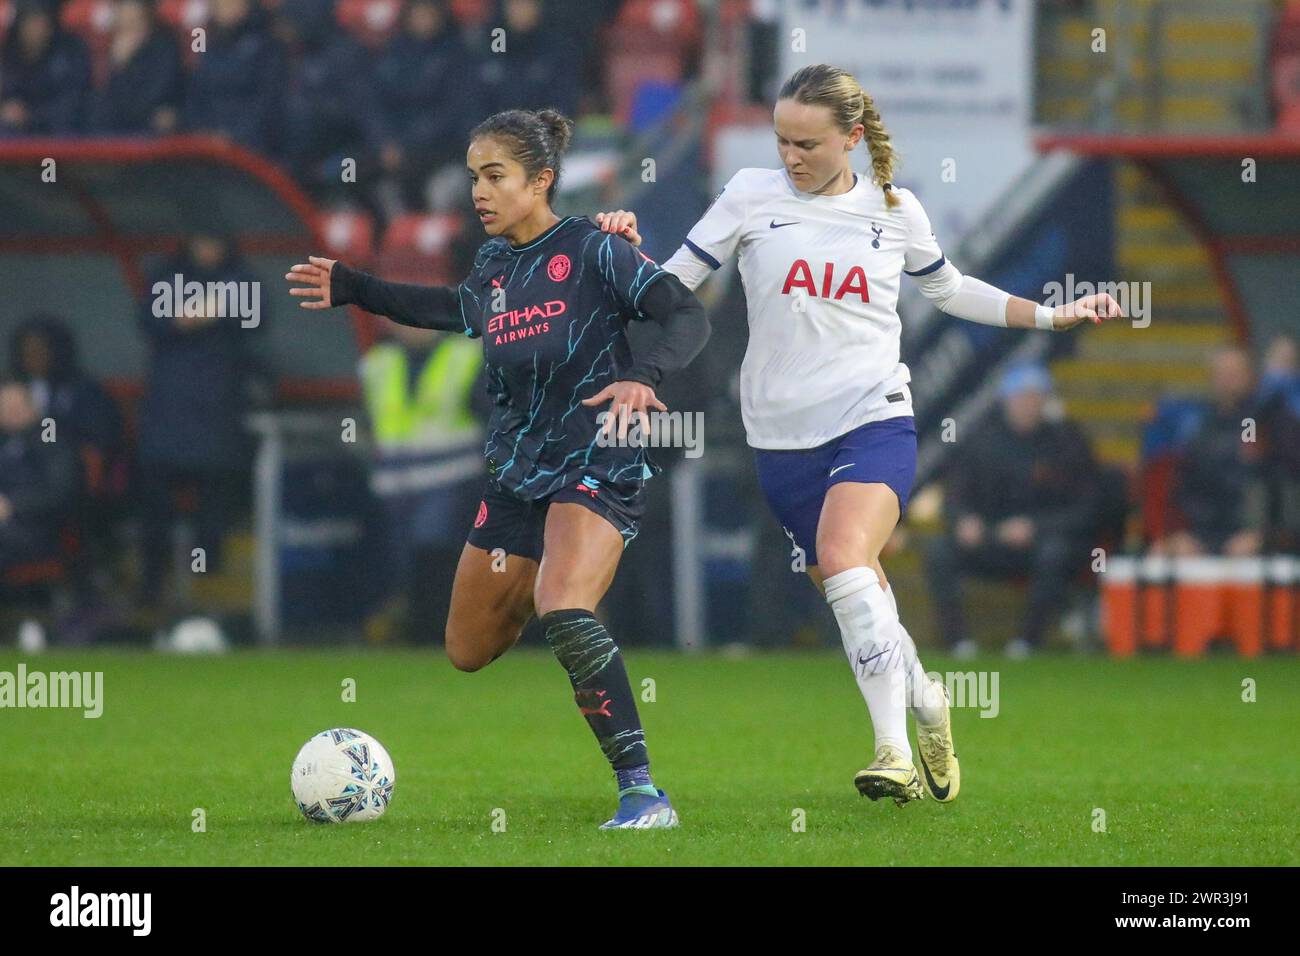 London, UK. 10th Mar, 2024. London, England, March 10th 2024: Mary Fowler (8 Manchester City) controls the ball while receiving pressure from Matilda Vinberg (13 Tottenham Hotspur) during the Womens FA Cup game between Tottenham Hotspur and Manchester City at Brisbane Road in London, England. (Alexander Canillas/SPP) Credit: SPP Sport Press Photo. /Alamy Live News Stock Photo